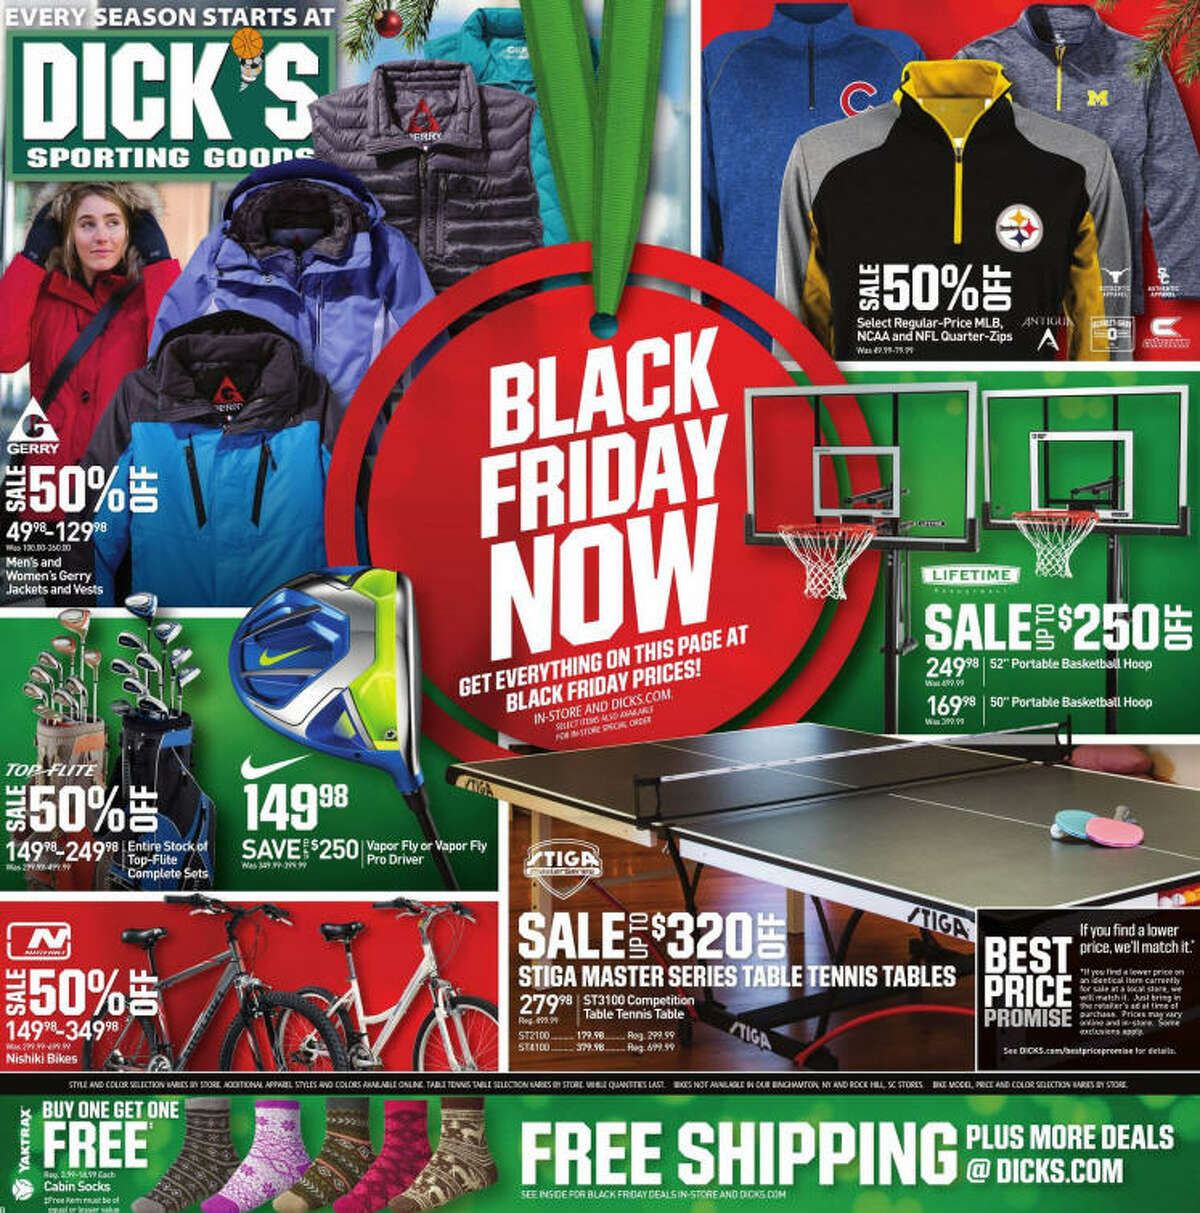 Dick's Sporting Goods' Black Friday 2016 deals you can shop now